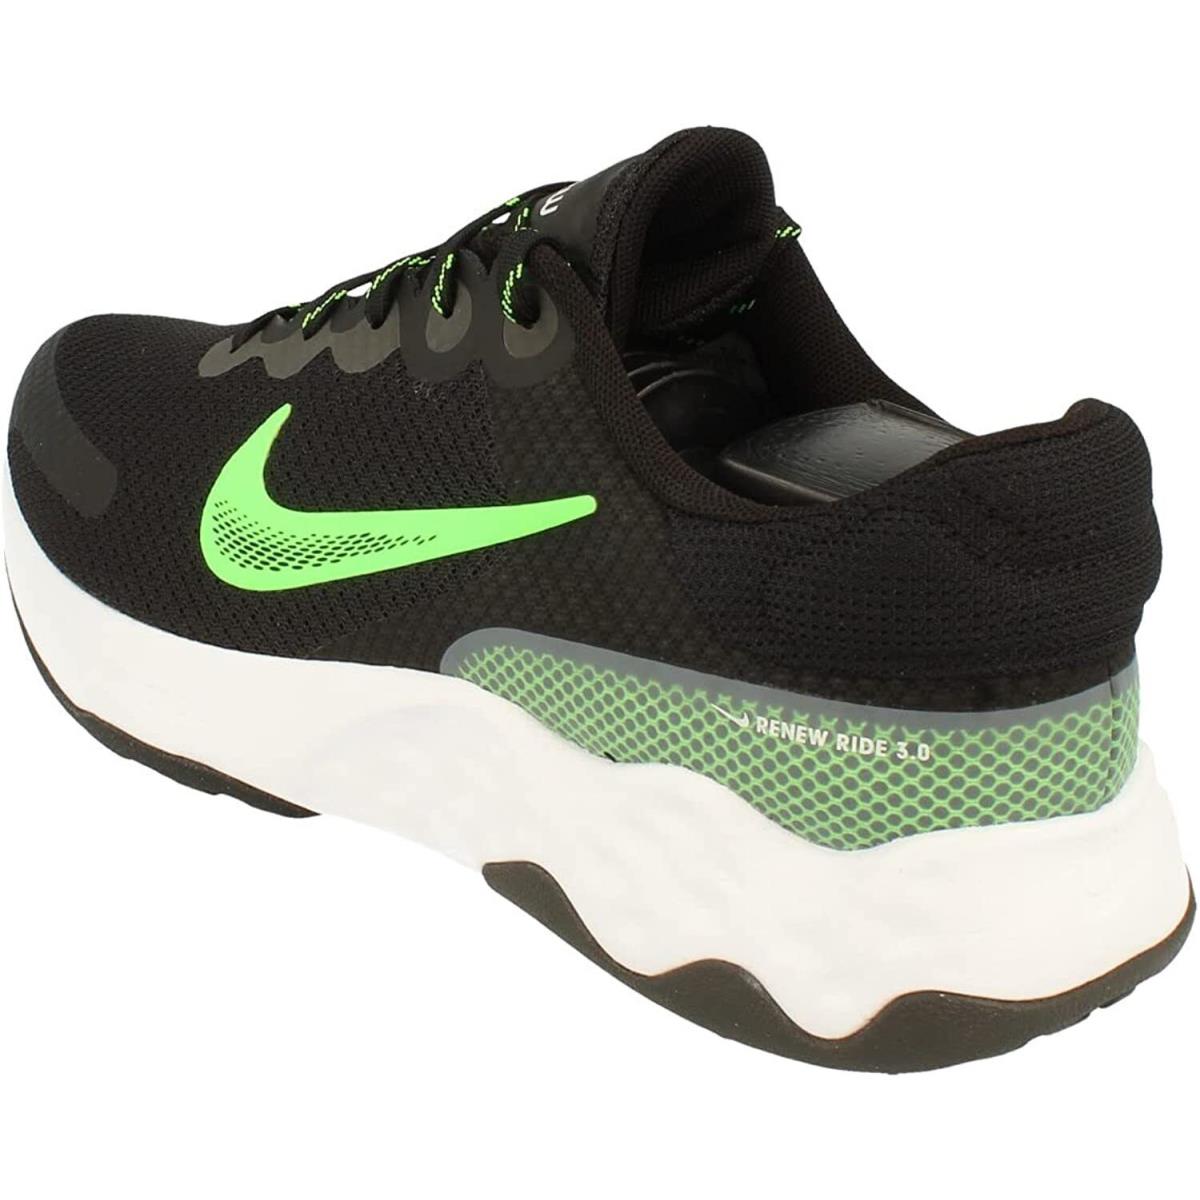 Nike Renew Ride 3 Mens Road Running Trainers Dc8185 003 Sneakers Shoes 9.5 12.5